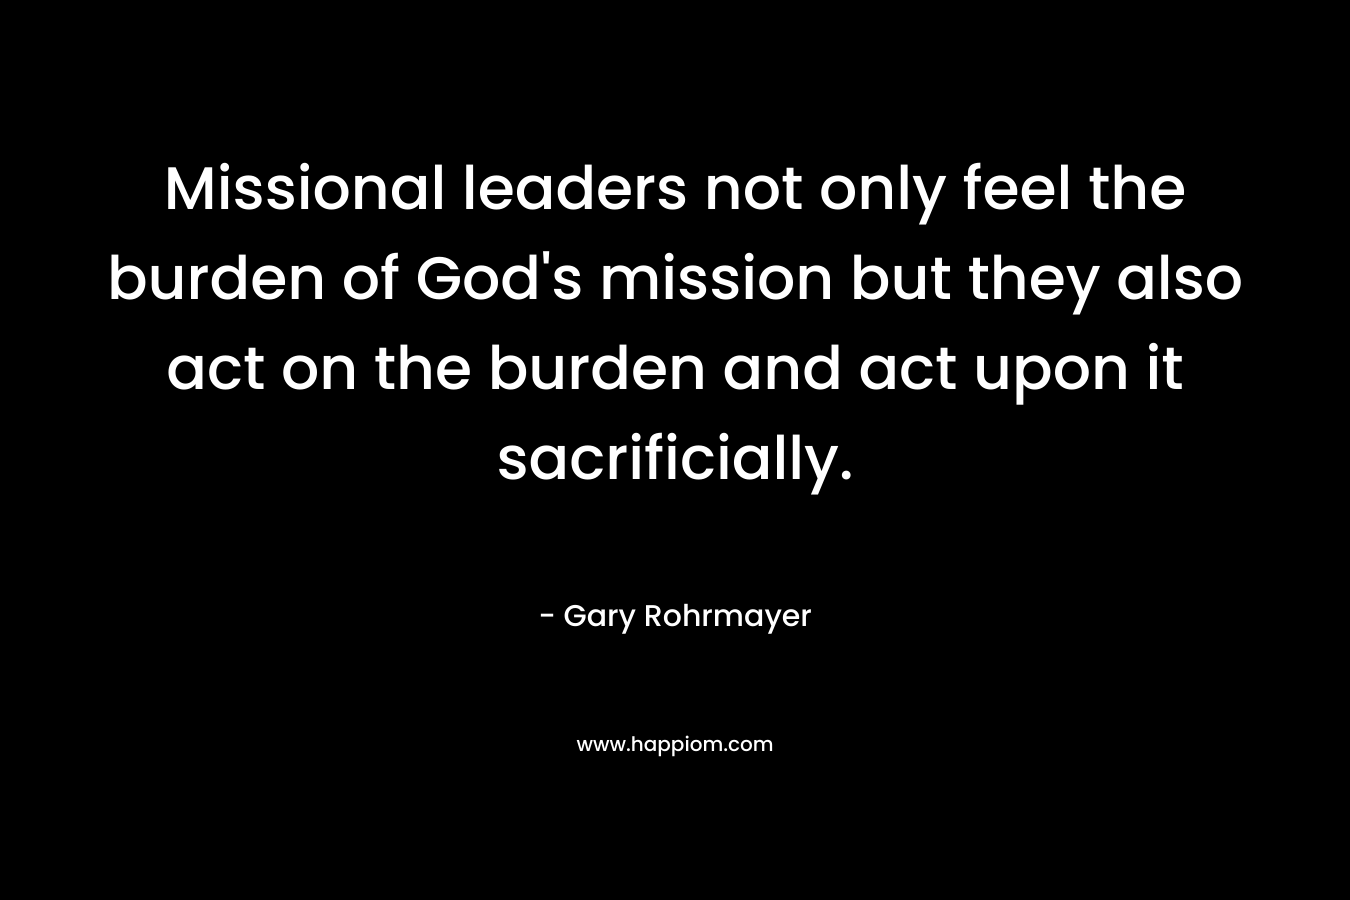 Missional leaders not only feel the burden of God's mission but they also act on the burden and act upon it sacrificially.